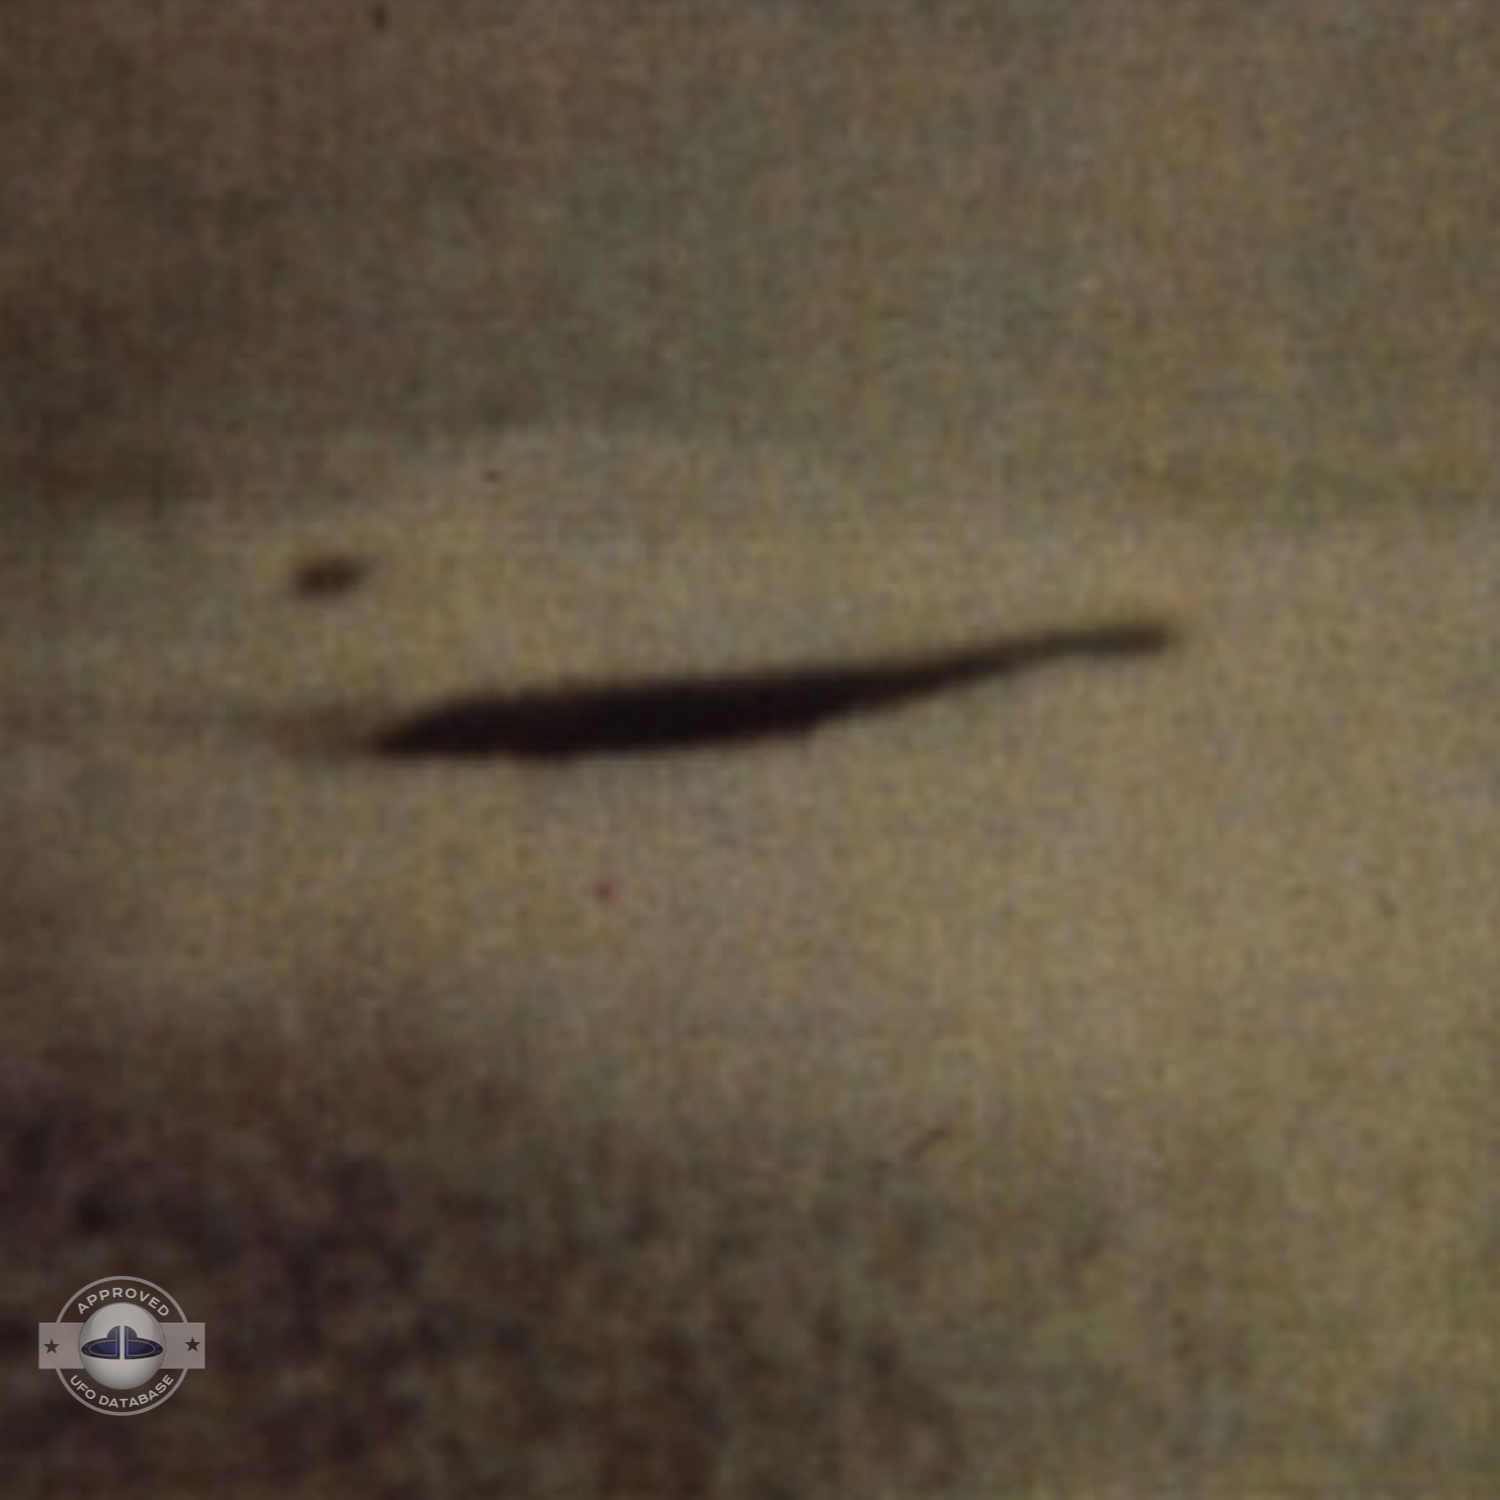 One of the oldest UFO picture taken in 1944 UFO over a house UFO Picture #33-3